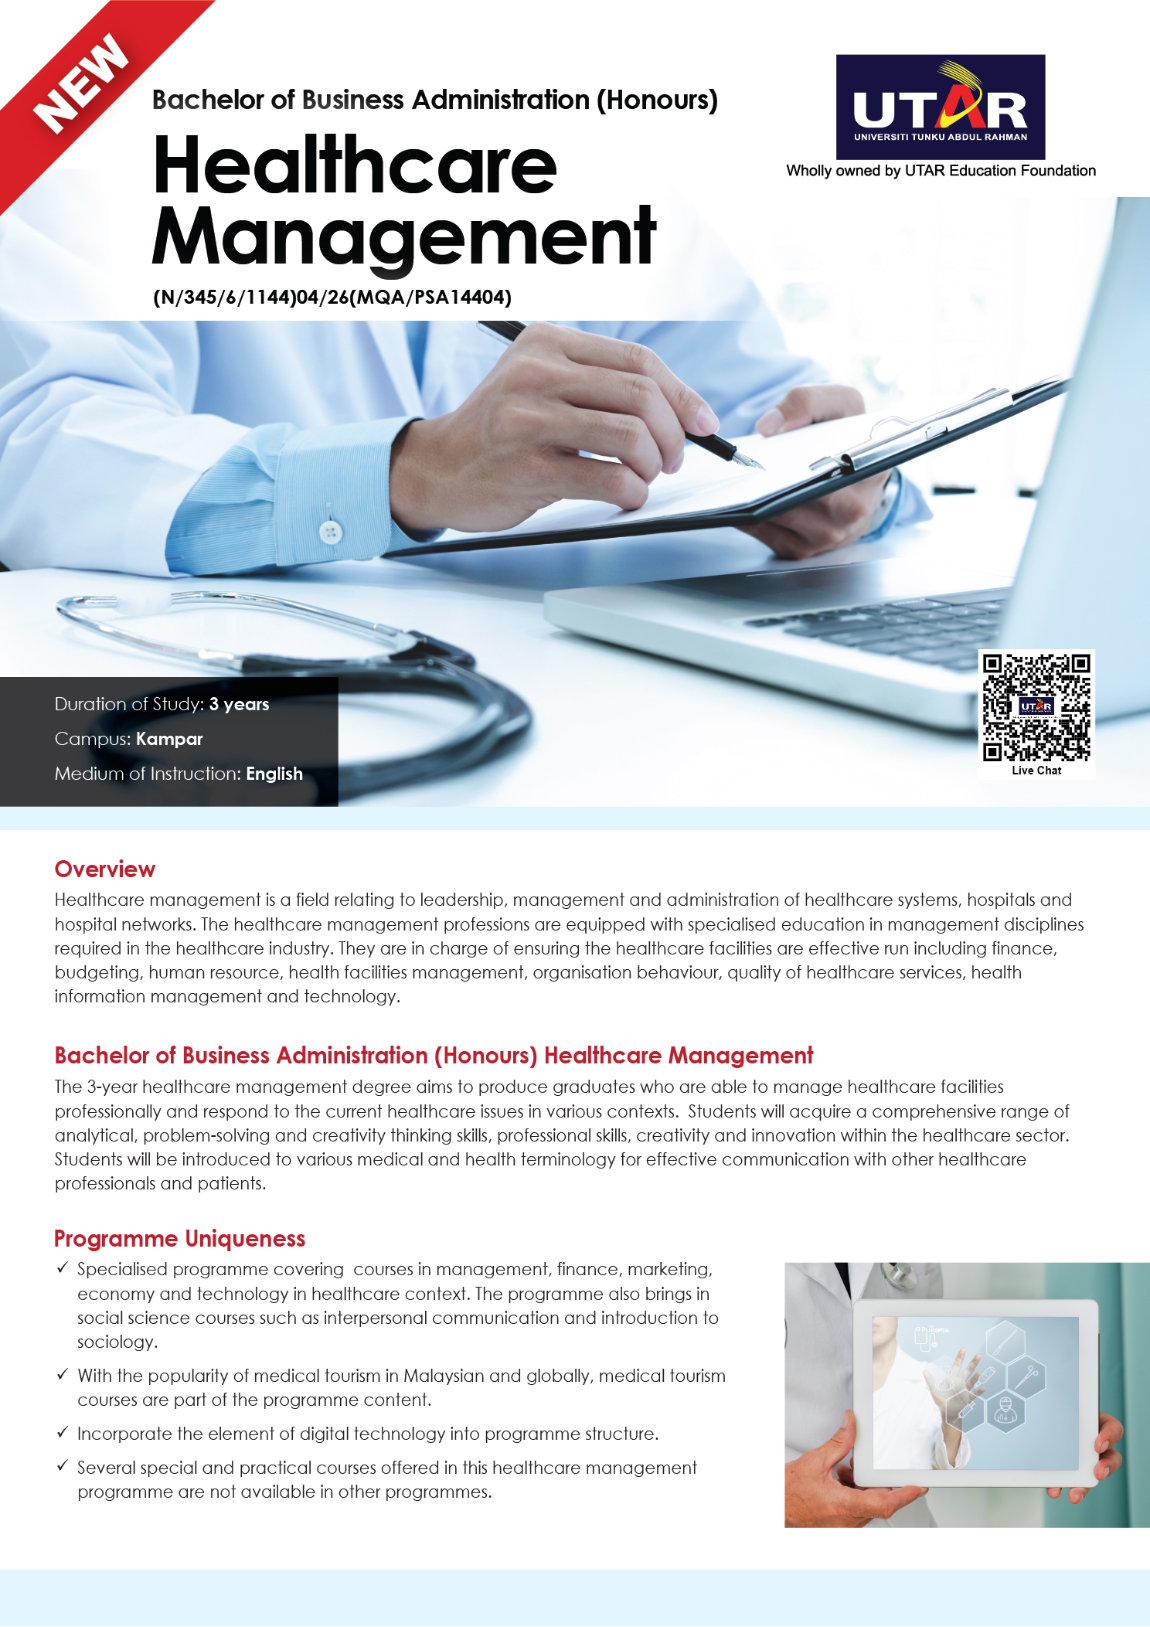 Health care management bachelor degree in Malaysia